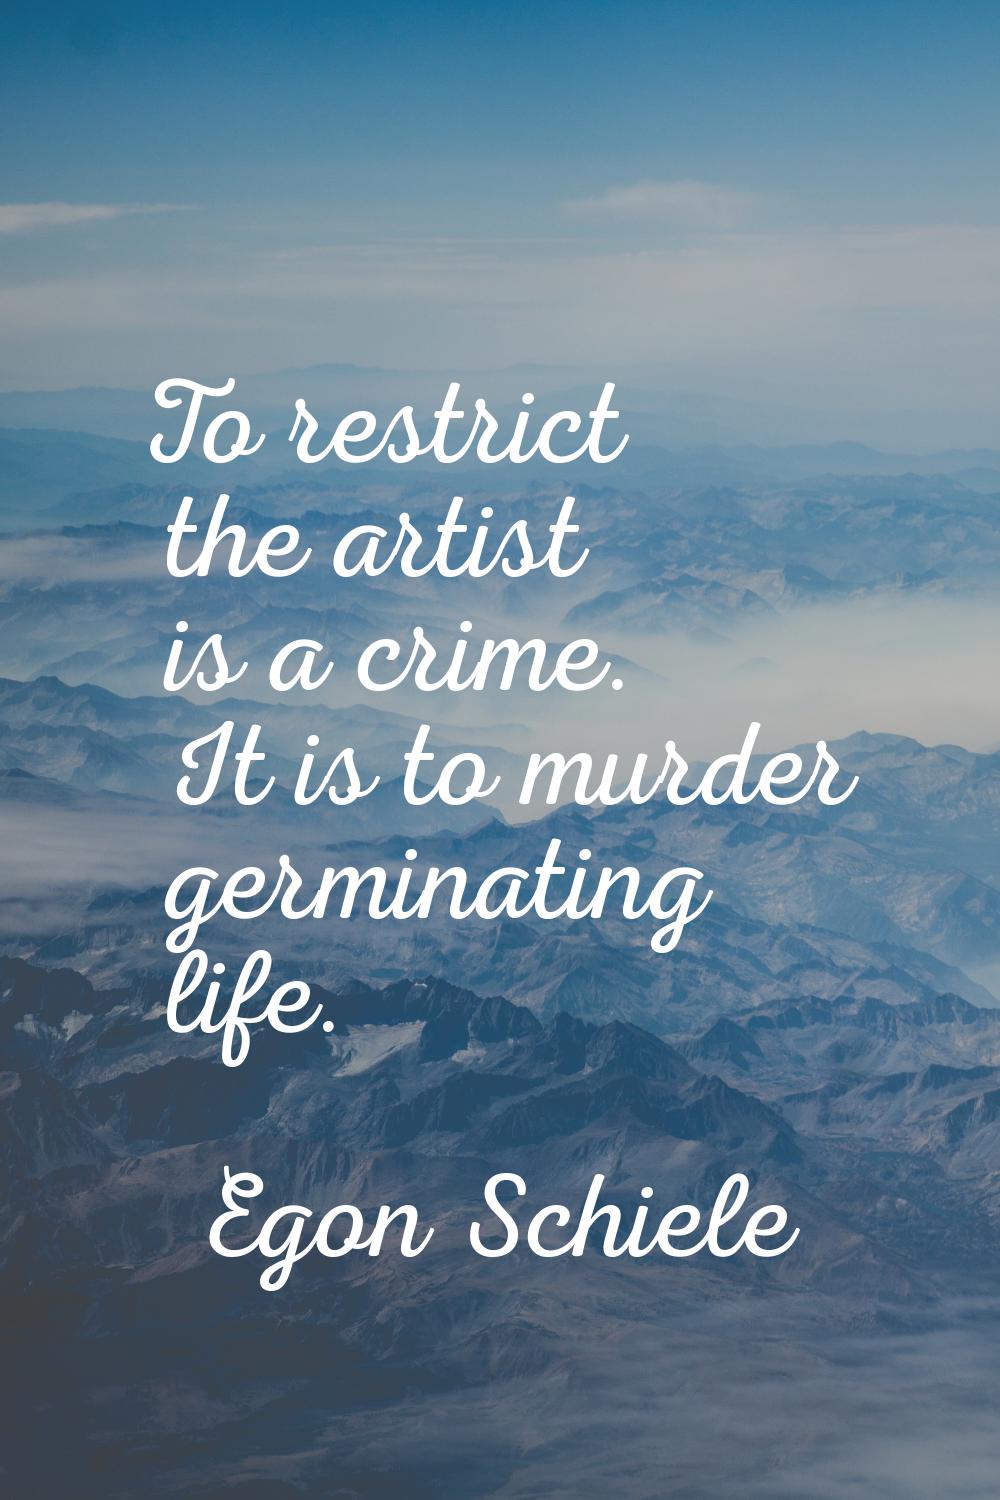 To restrict the artist is a crime. It is to murder germinating life.